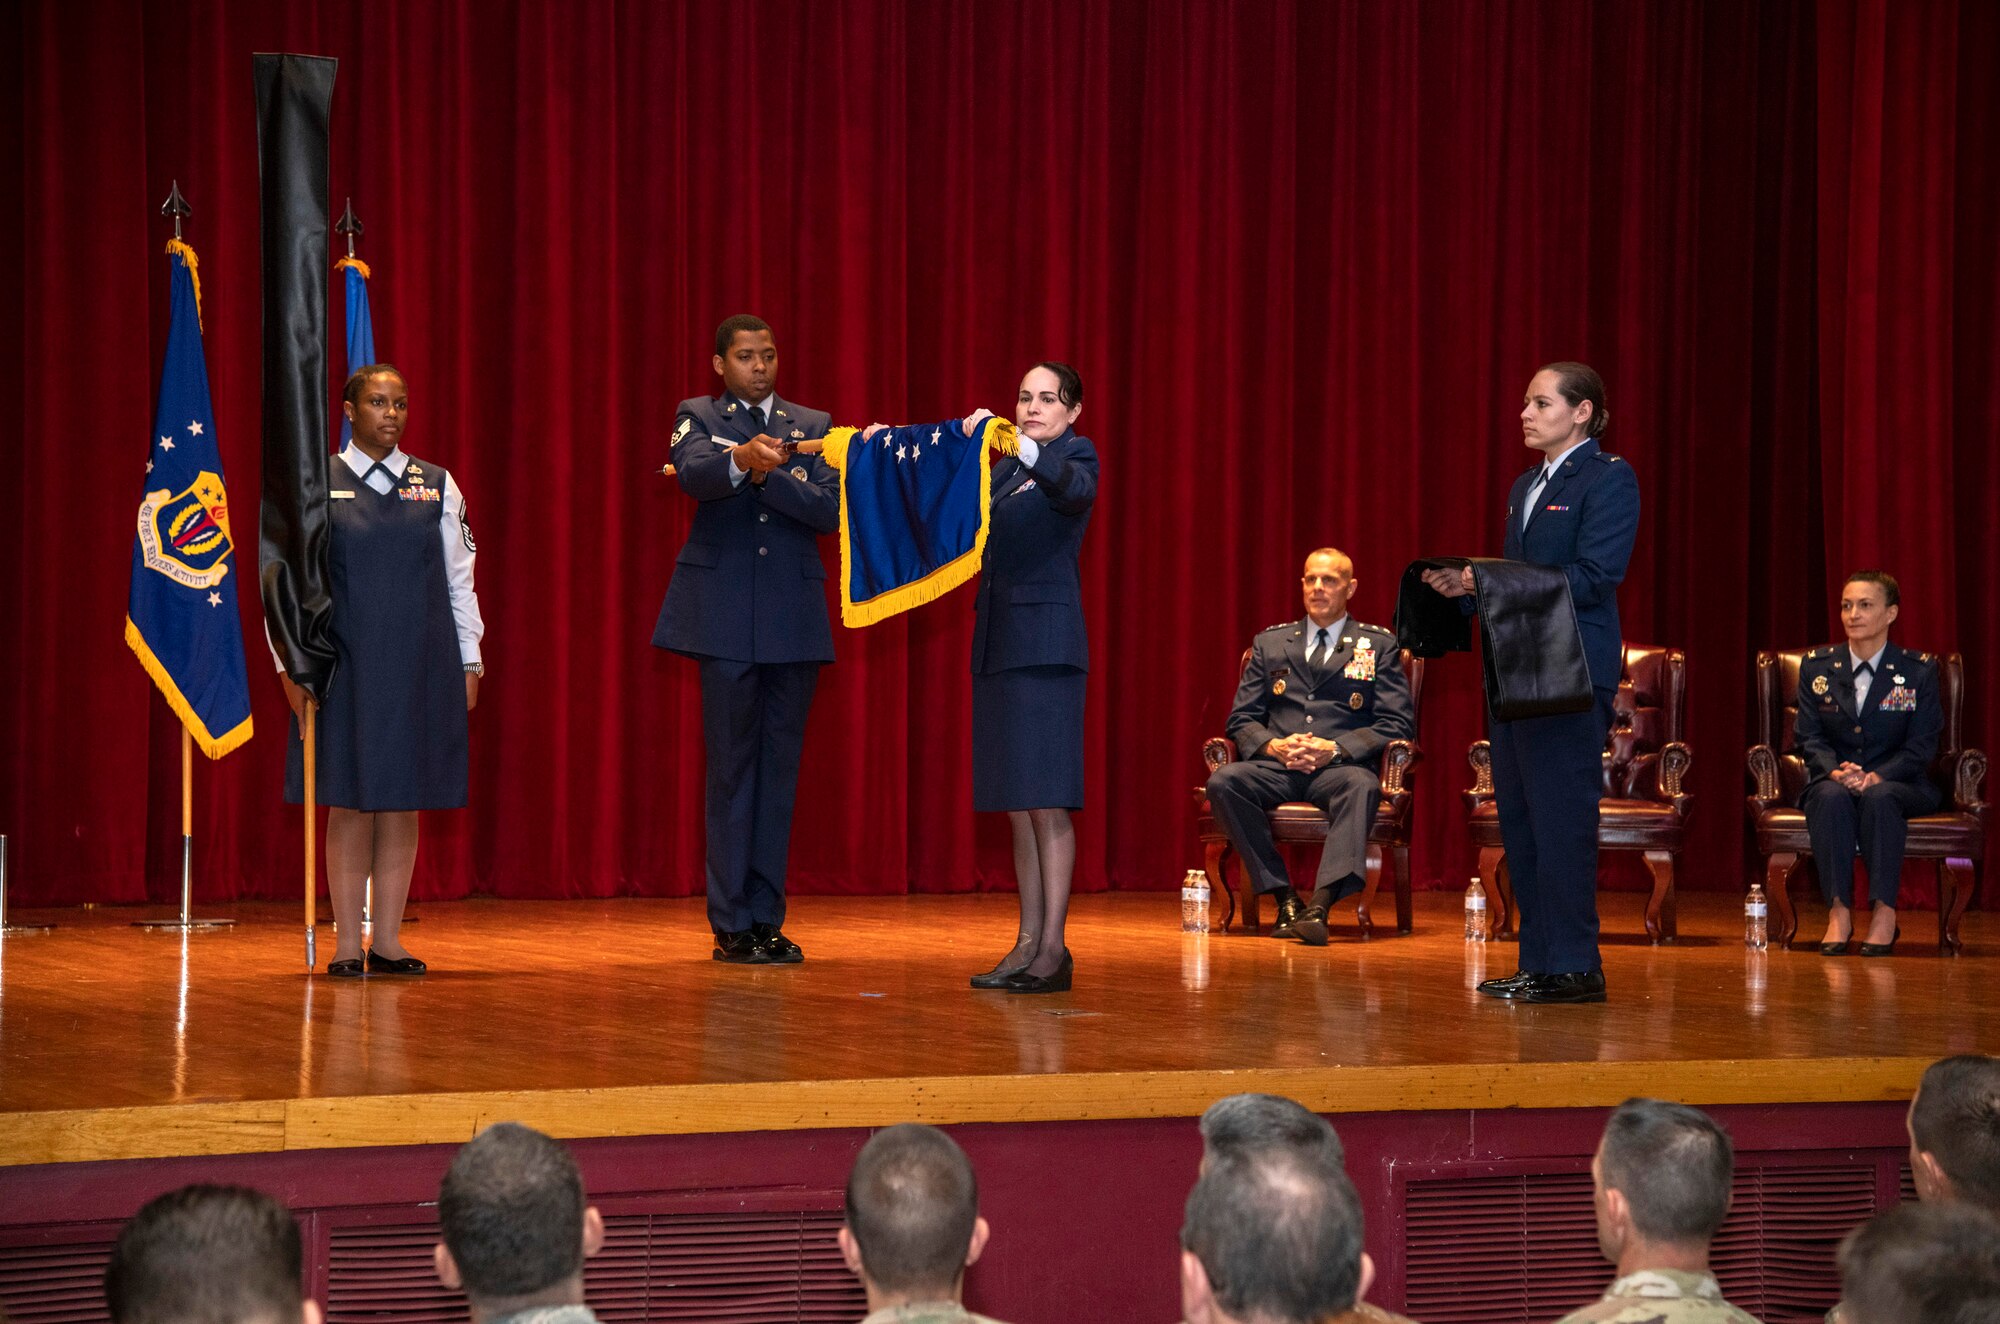 Brig. Gen. Alice Trevino, commander of the newly named Air Force Installation Contracting Center, furls her unit's old Air Force Installation Contracting Agency flag at a special ceremony June 25, 2019, on Joint Base San Antonio-Lackland, Texas. The Air Force Installation and Mission Support Center formally redesignated AFICC and the Air Force Services Center -- two of its primary subordinate units -- during a formal ceremony to bring them in line with Air Force naming conventions. (U.S. Air Force photo by Johnny Saldivar)